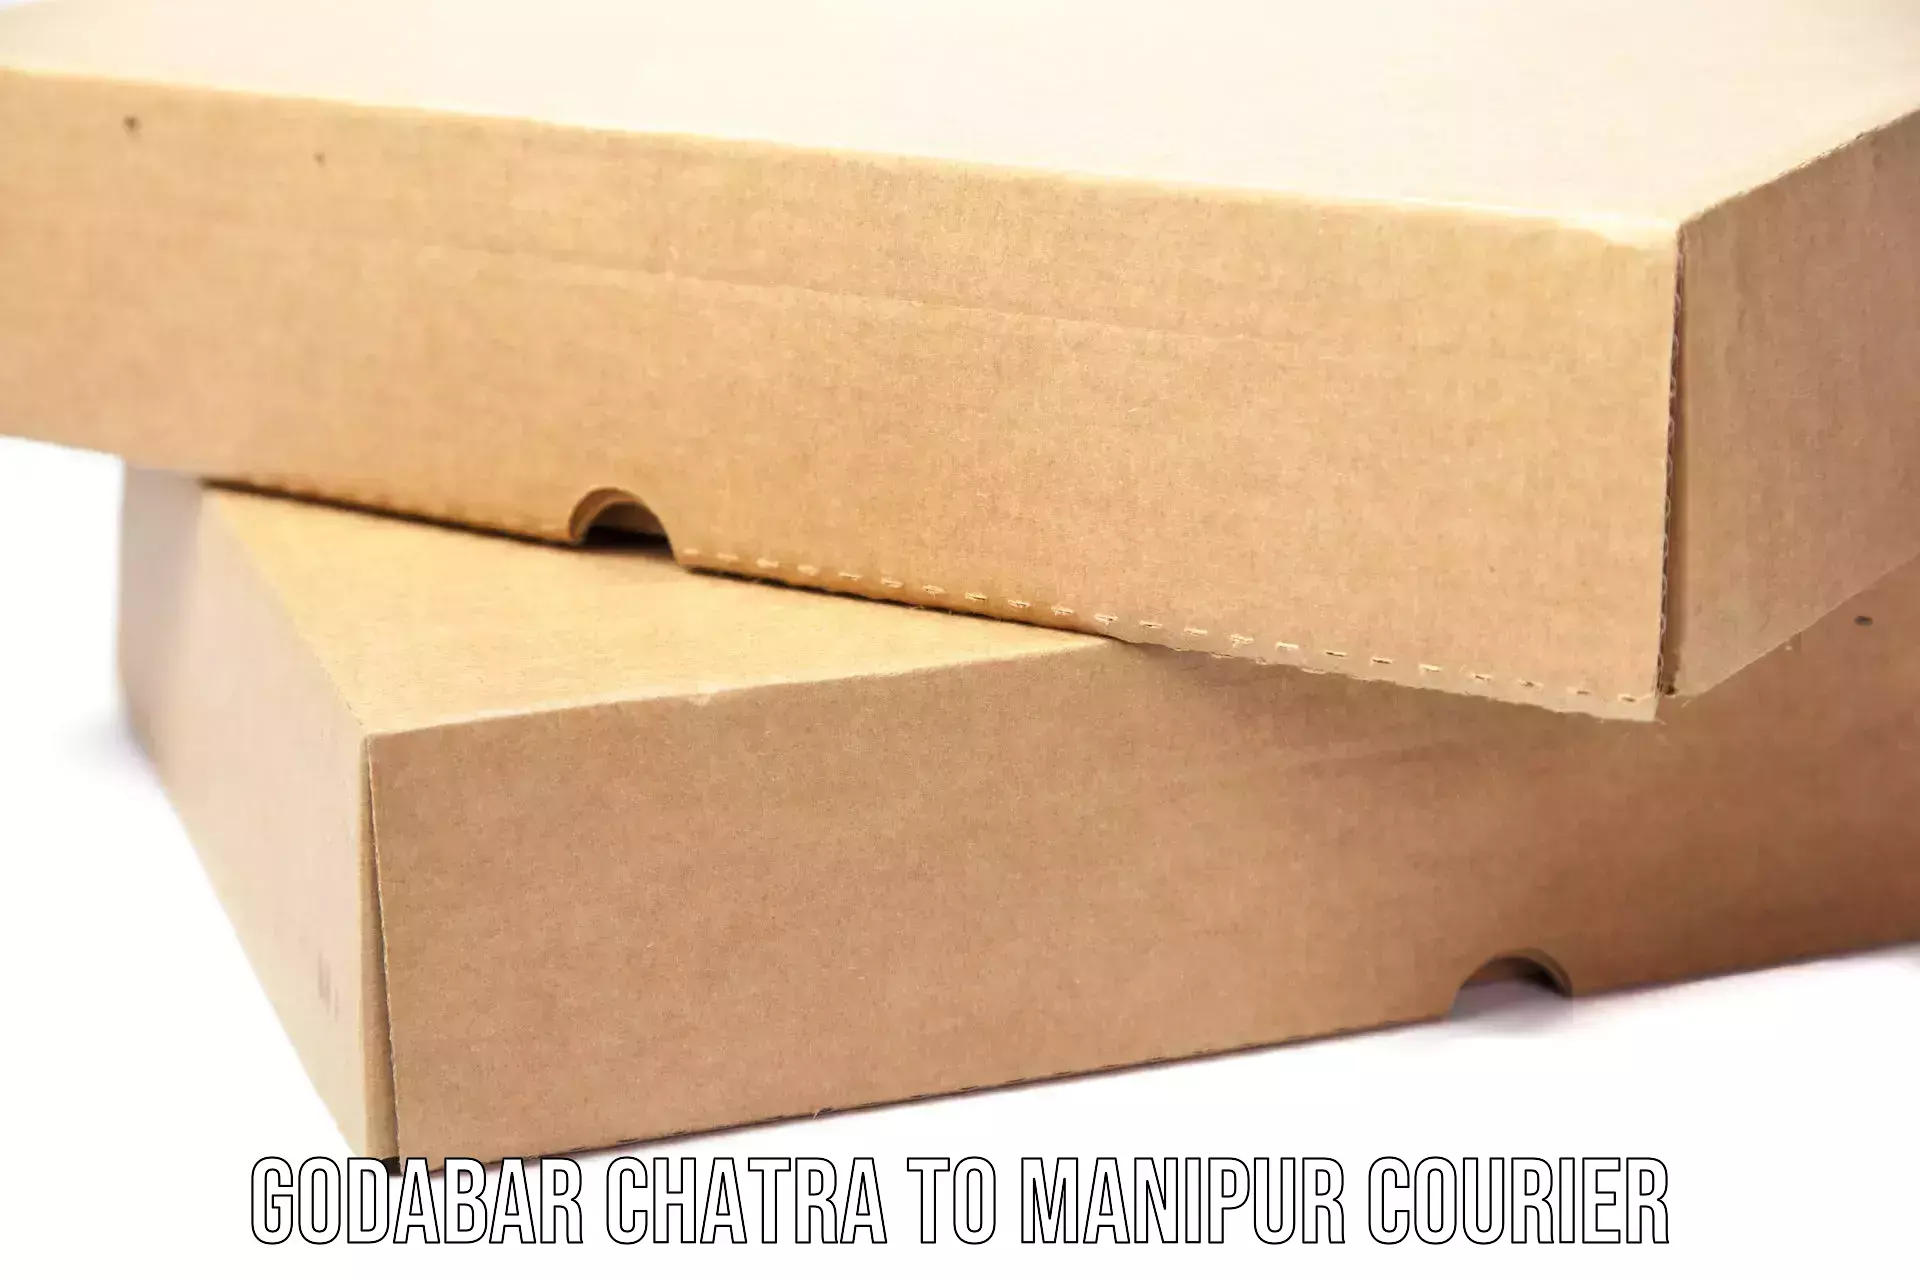 Full-service courier options in Godabar Chatra to Kanti